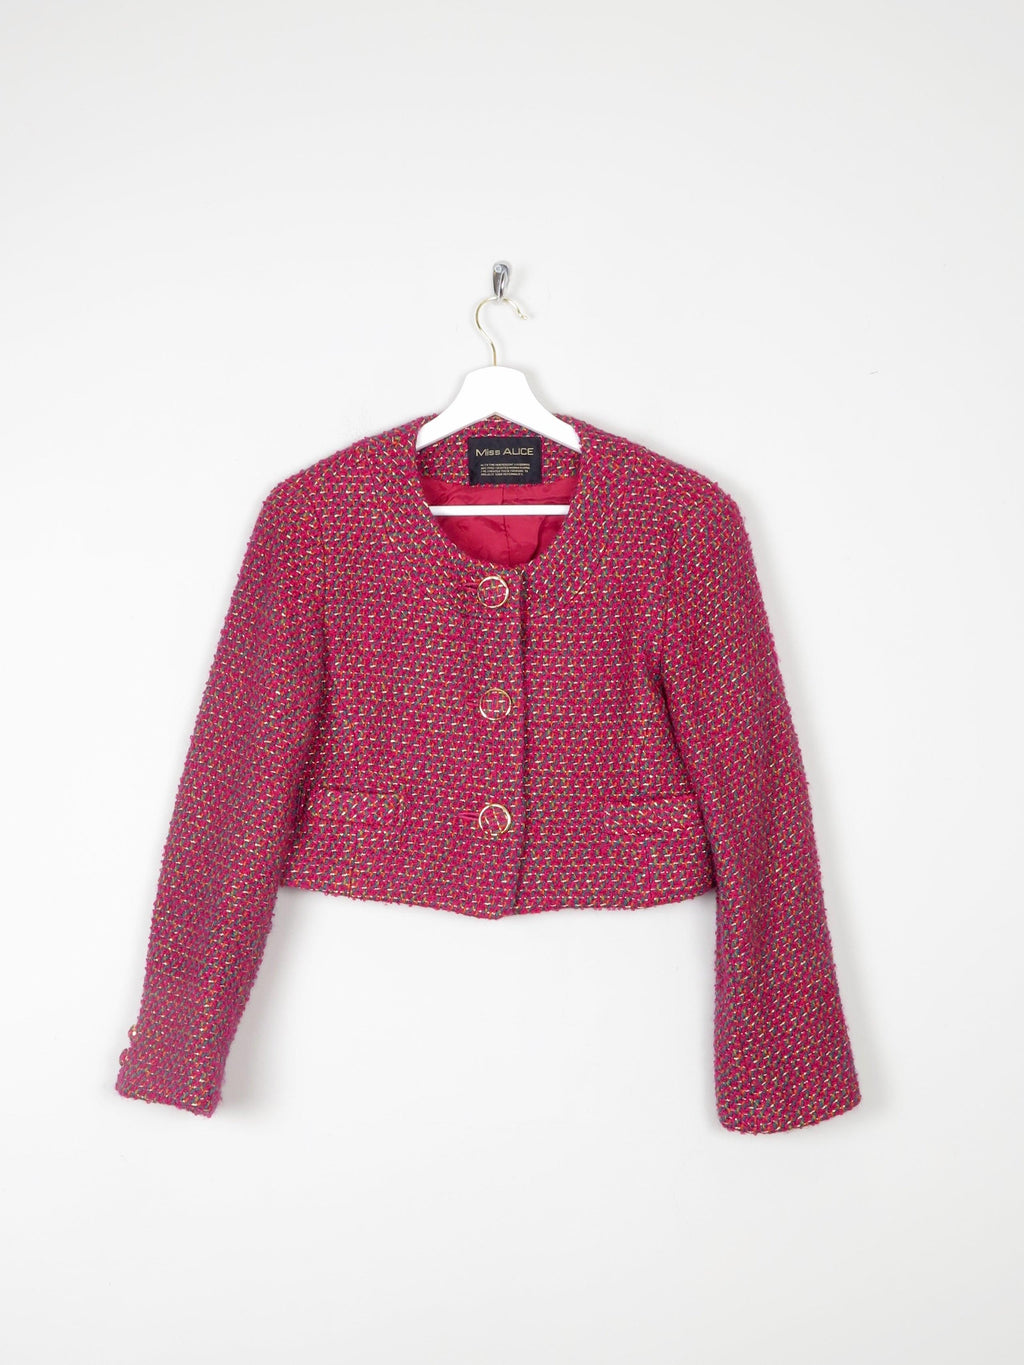 Women’s Cherry Red Vintage Cropped Tweed Jacket S - The Harlequin